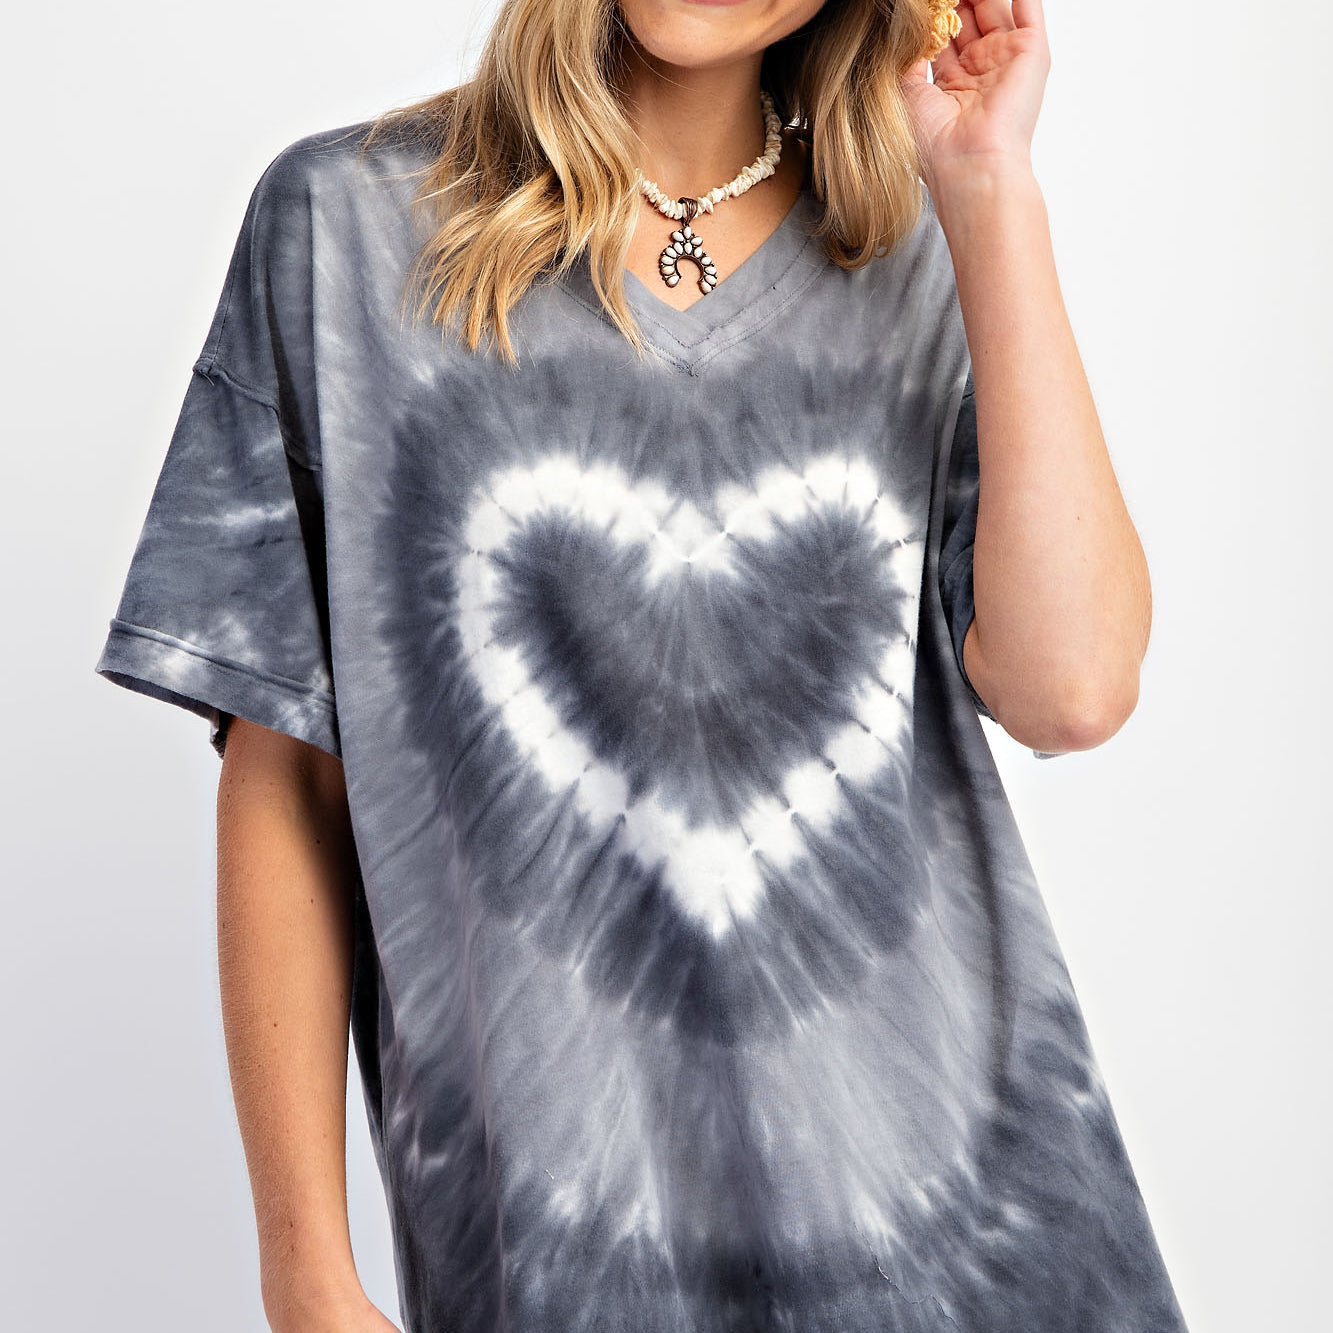 Heart Tie Dye Washed Top by Easel-Apparel-Easel-LouisGeorge Boutique, Women’s Fashion Boutique Located in Trussville, Alabama